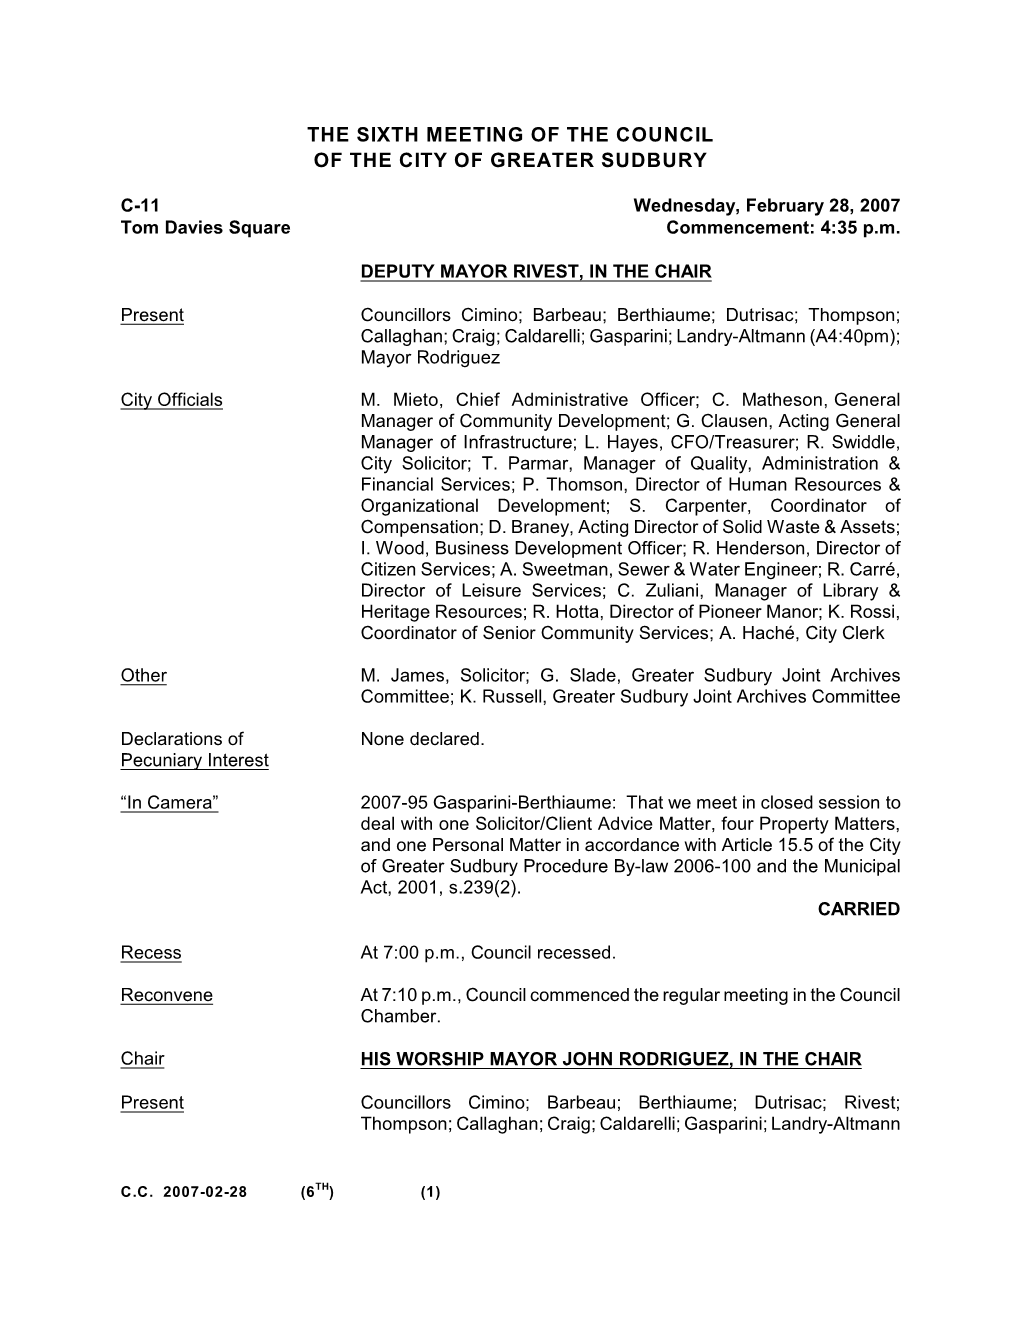 The Sixth Meeting of the Council of the City of Greater Sudbury